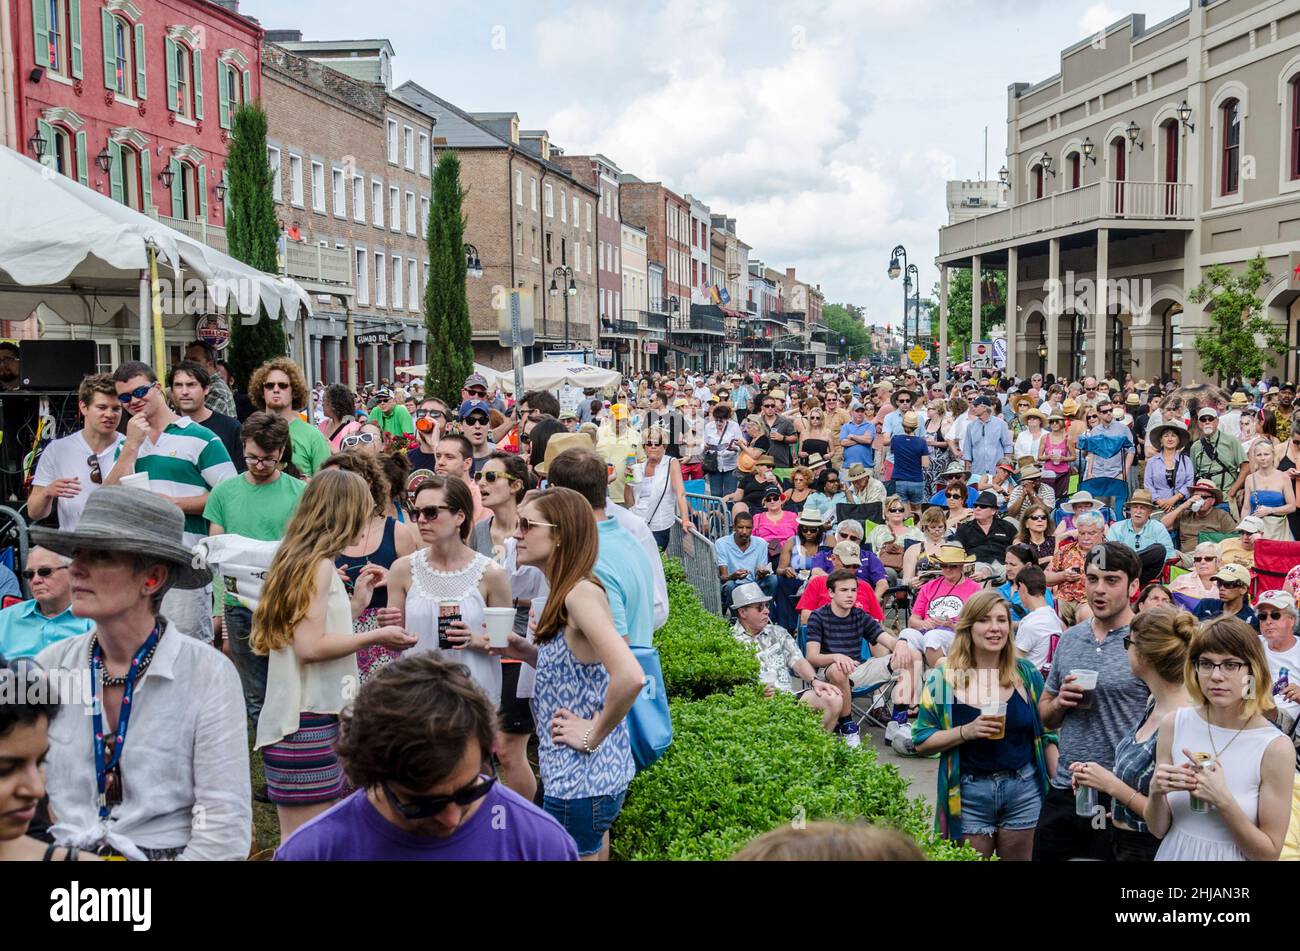 NEW ORLEANS, LA, USA - APRIL 13, 2014: Crowd Gathered at Decatur Street Stage at French Quarter Festival Stock Photo